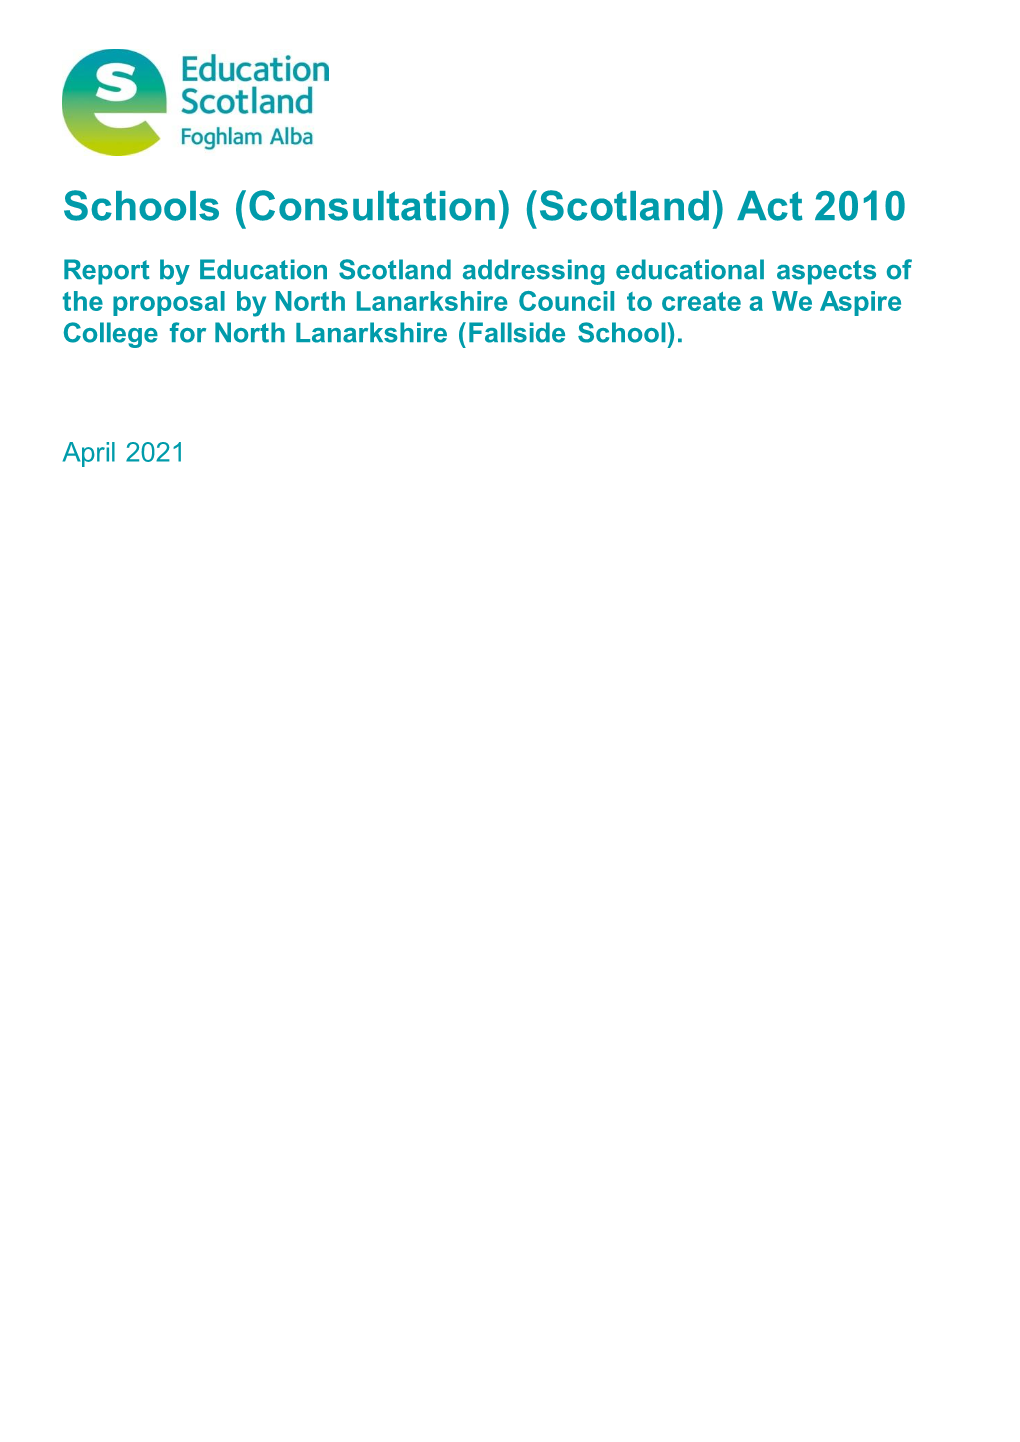 Report by Education Scotland Addressing Educational Aspects Of